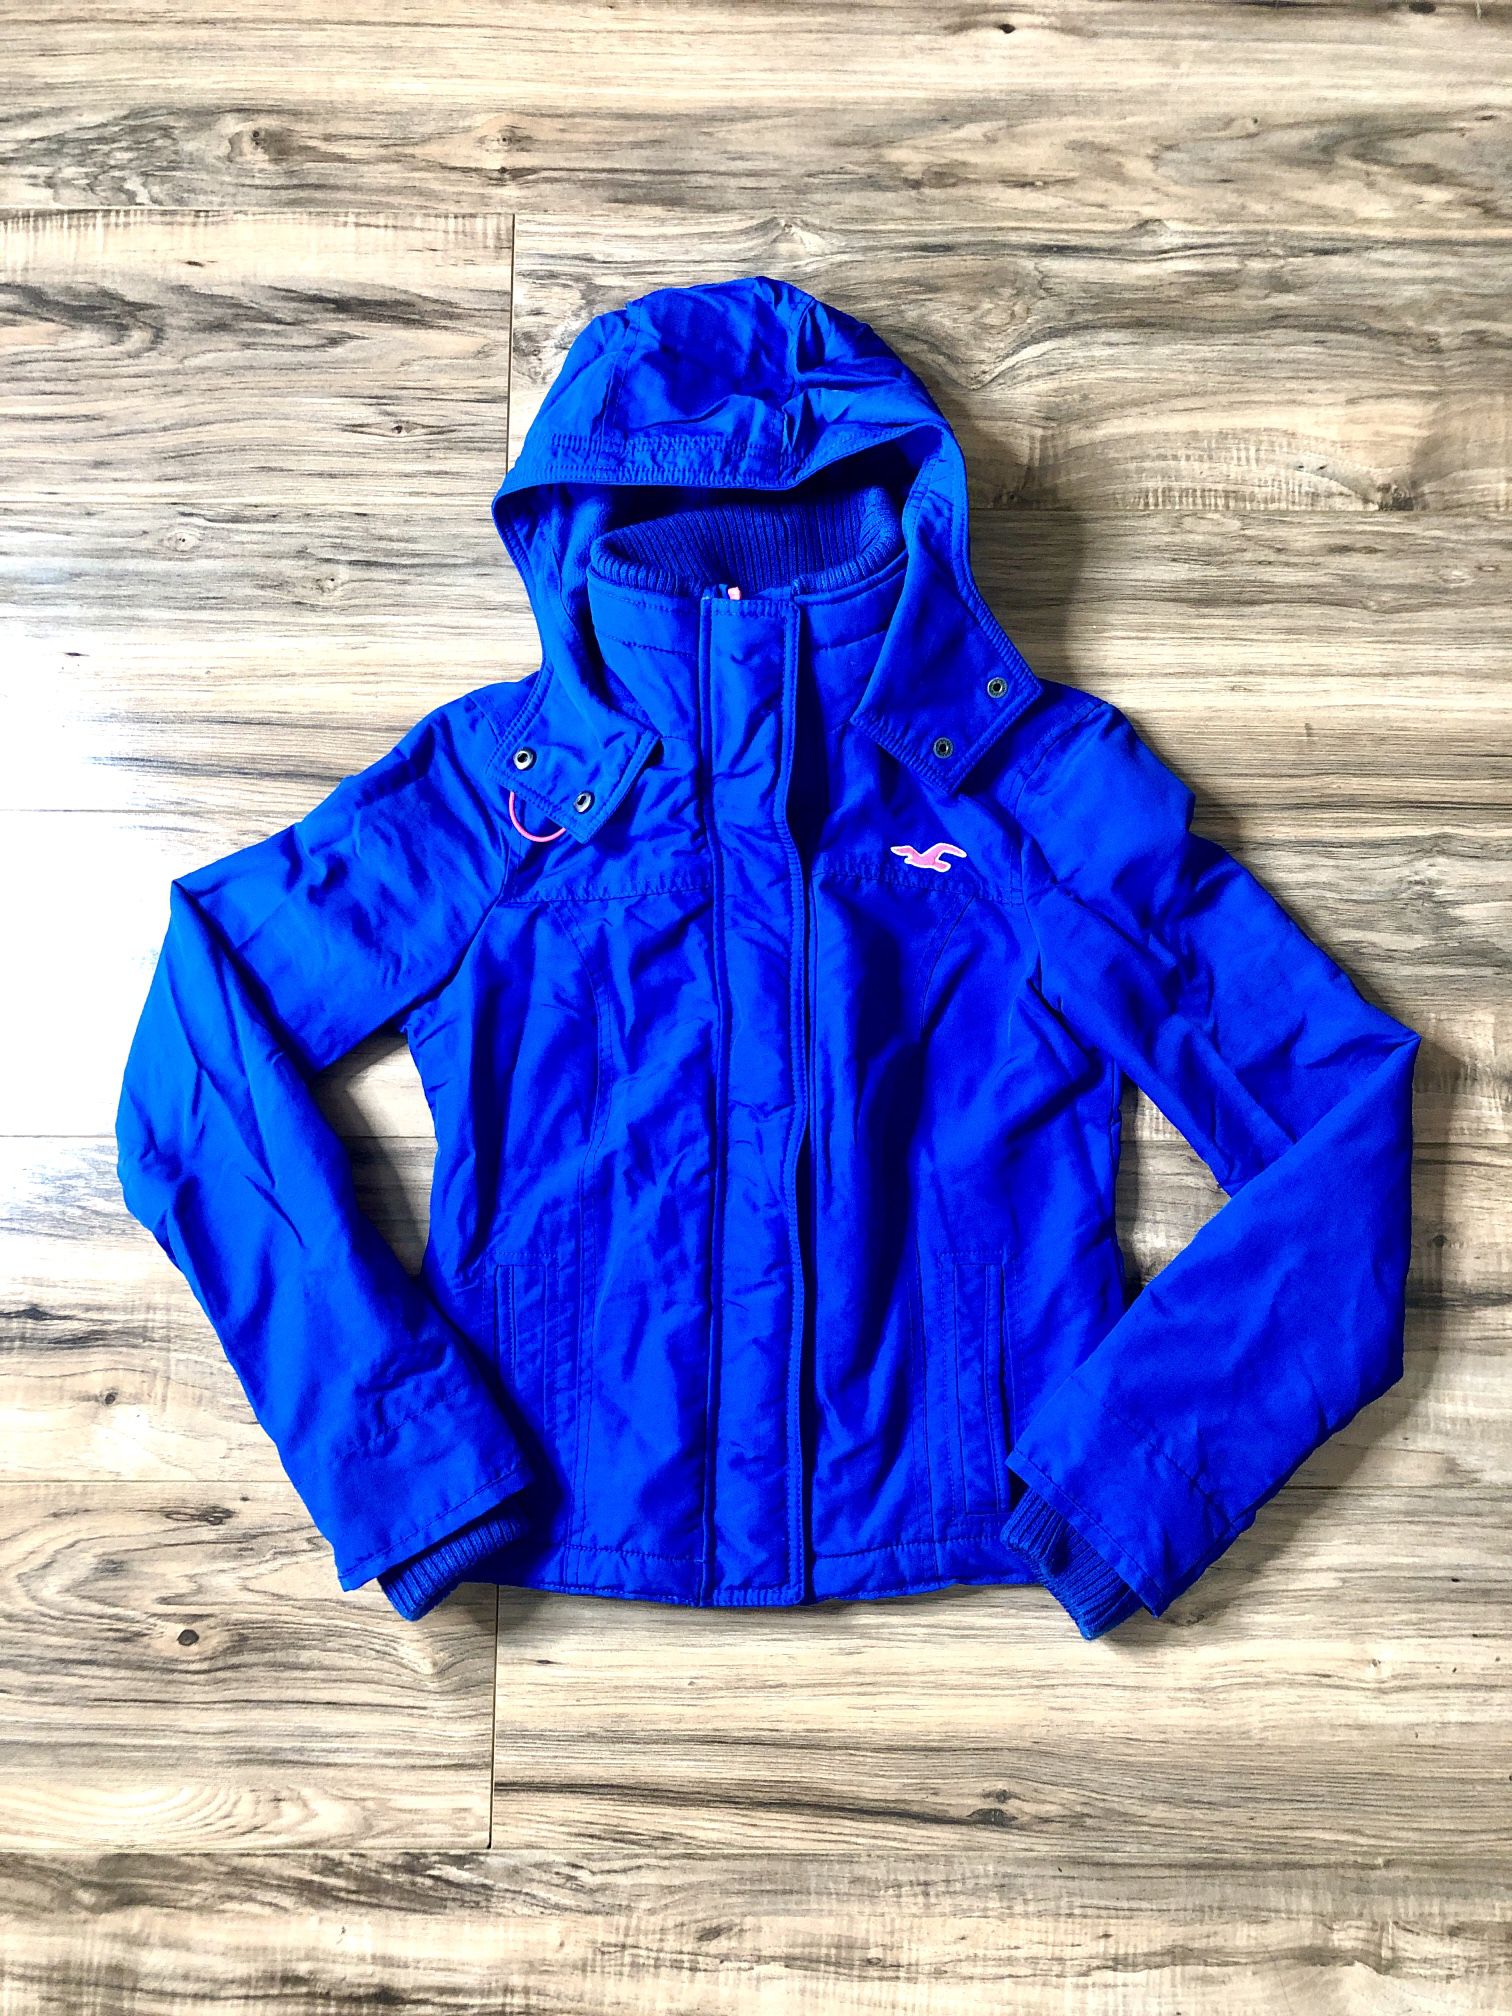 HOLLISTER ALL WEATHER JACKET ANORAK SIZE SMALL(SLIM) GORGEOUS COAT HOODED  ROYAL BLUE for Sale in San Bernardino, CA - OfferUp